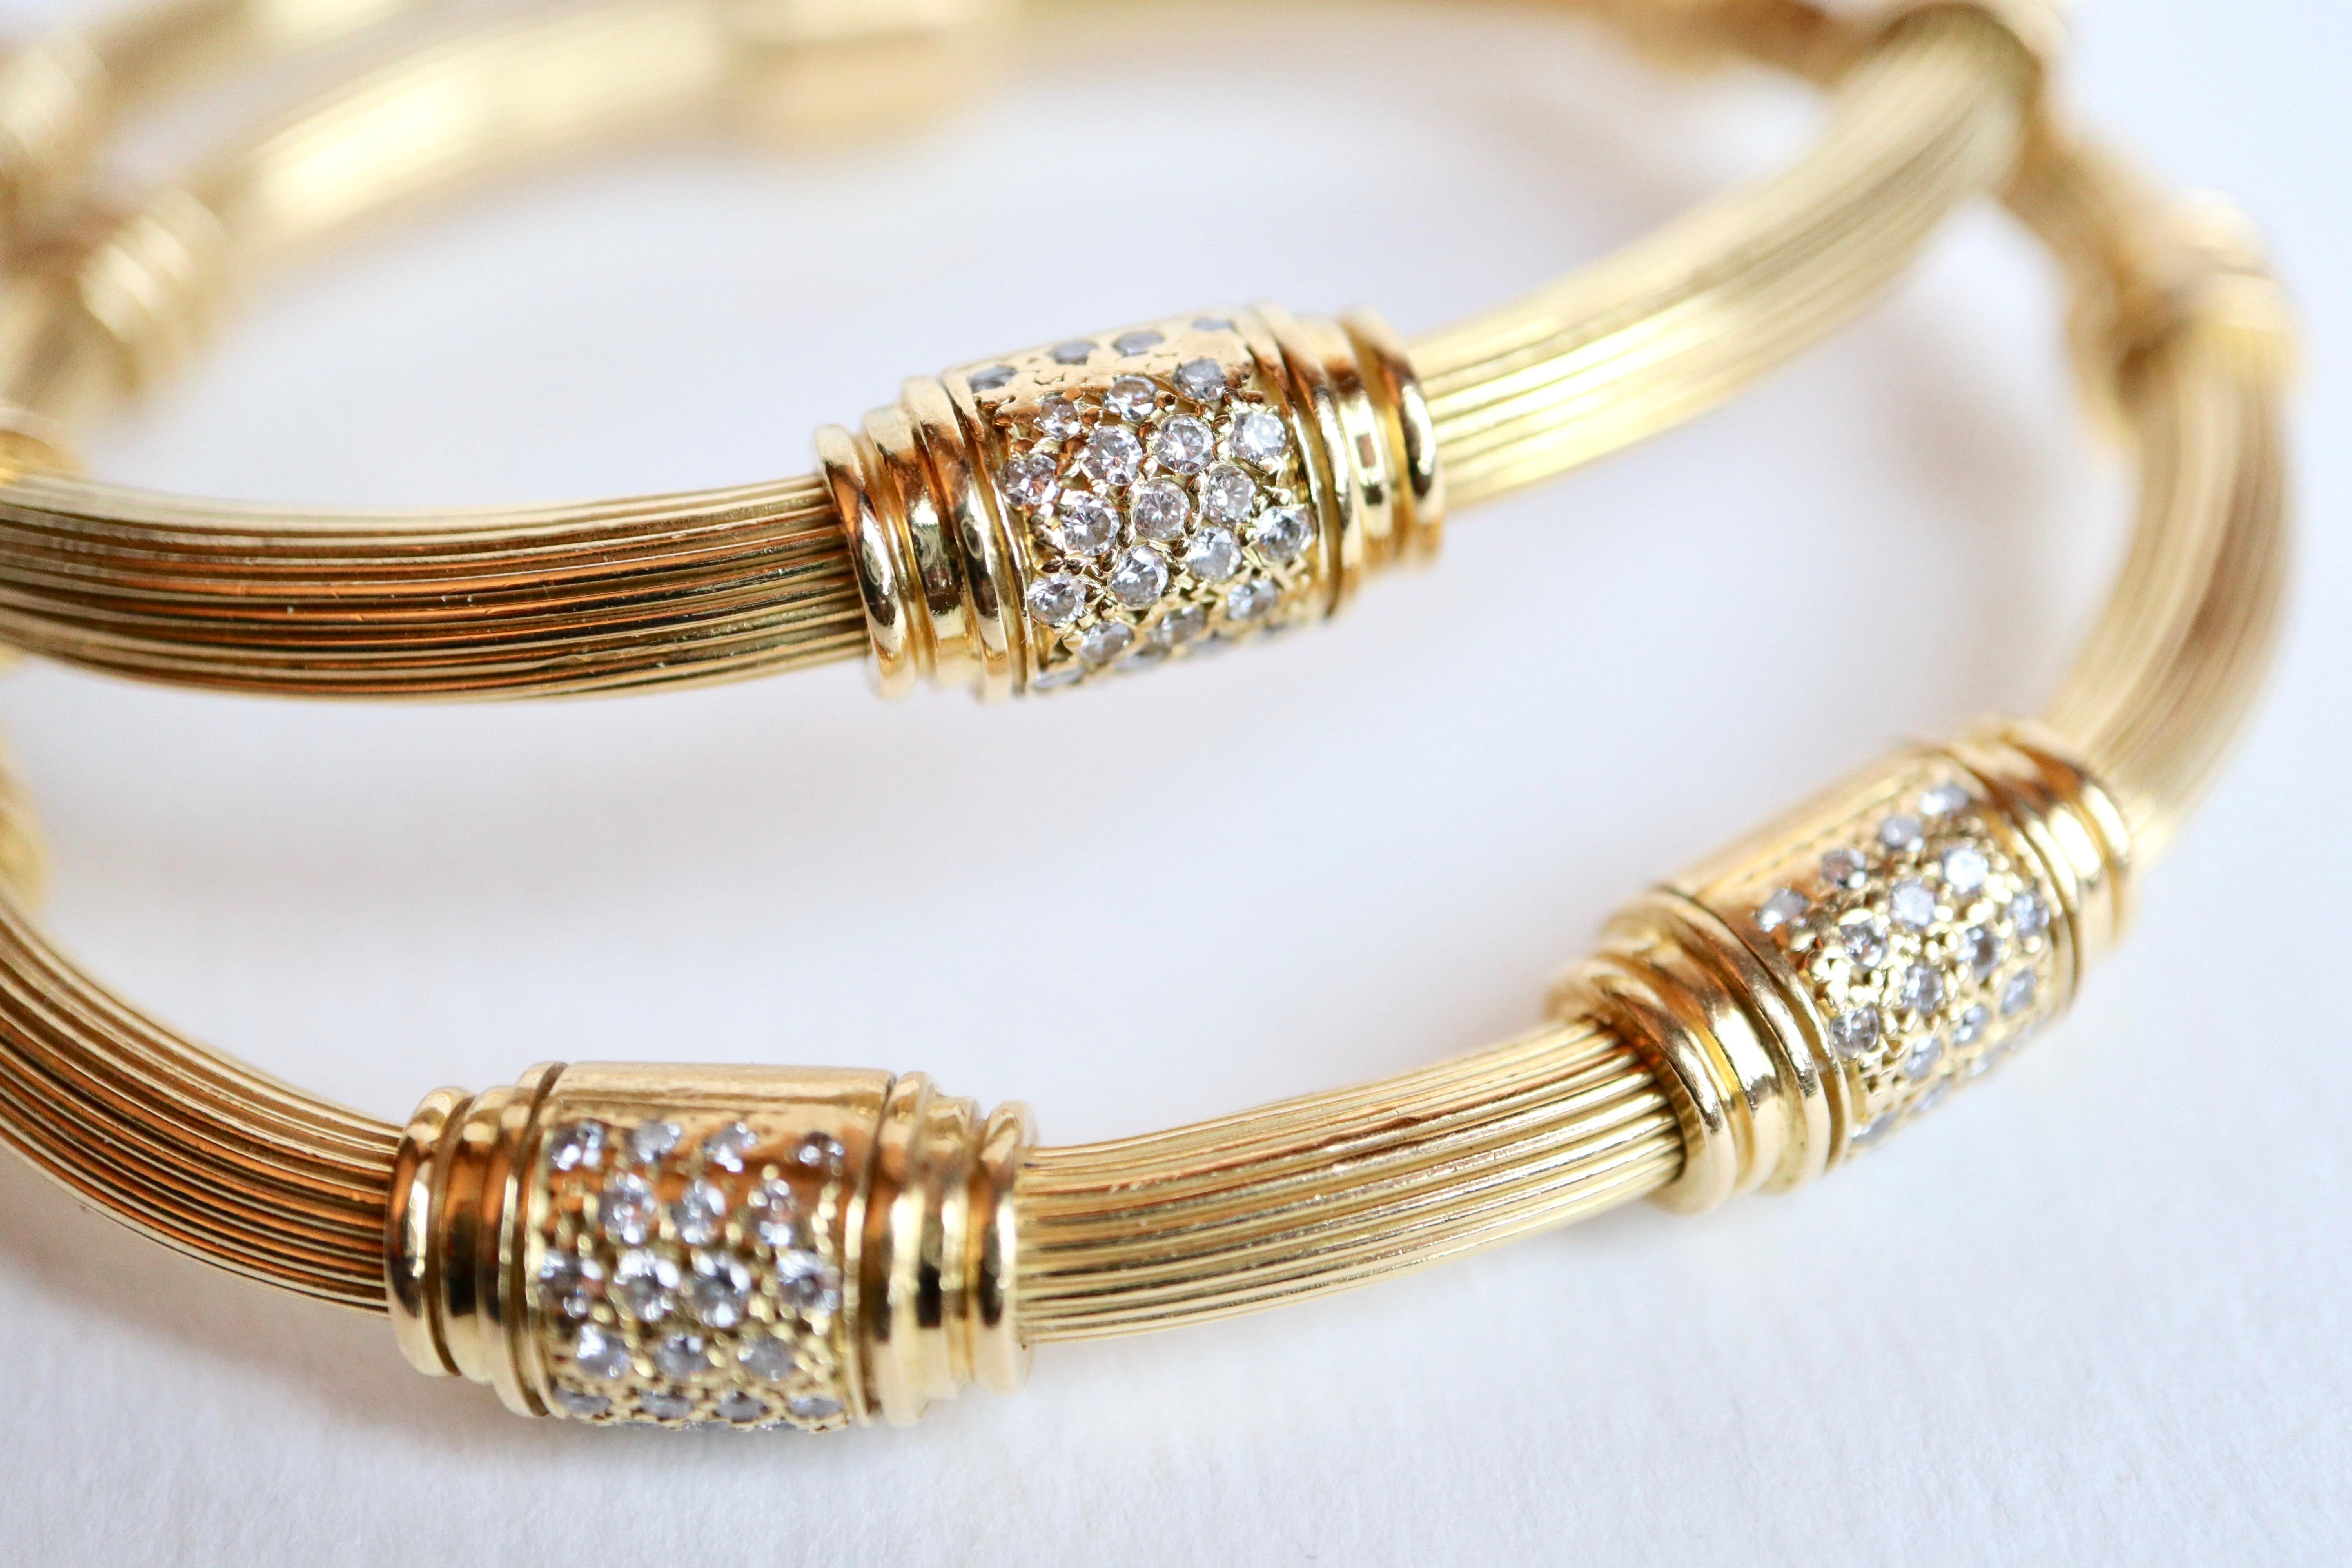 18 kt yellow Gold and Diamonds multi-strand Bangles
One Semi-rigid Bangle Bracelet opening in 18 kt yellow Gold multi-strand retained by Passers-by, three are set with Diamonds, one more important. Invisible Clasp.
Owl Hallmark
Length: 16.5 cm Width